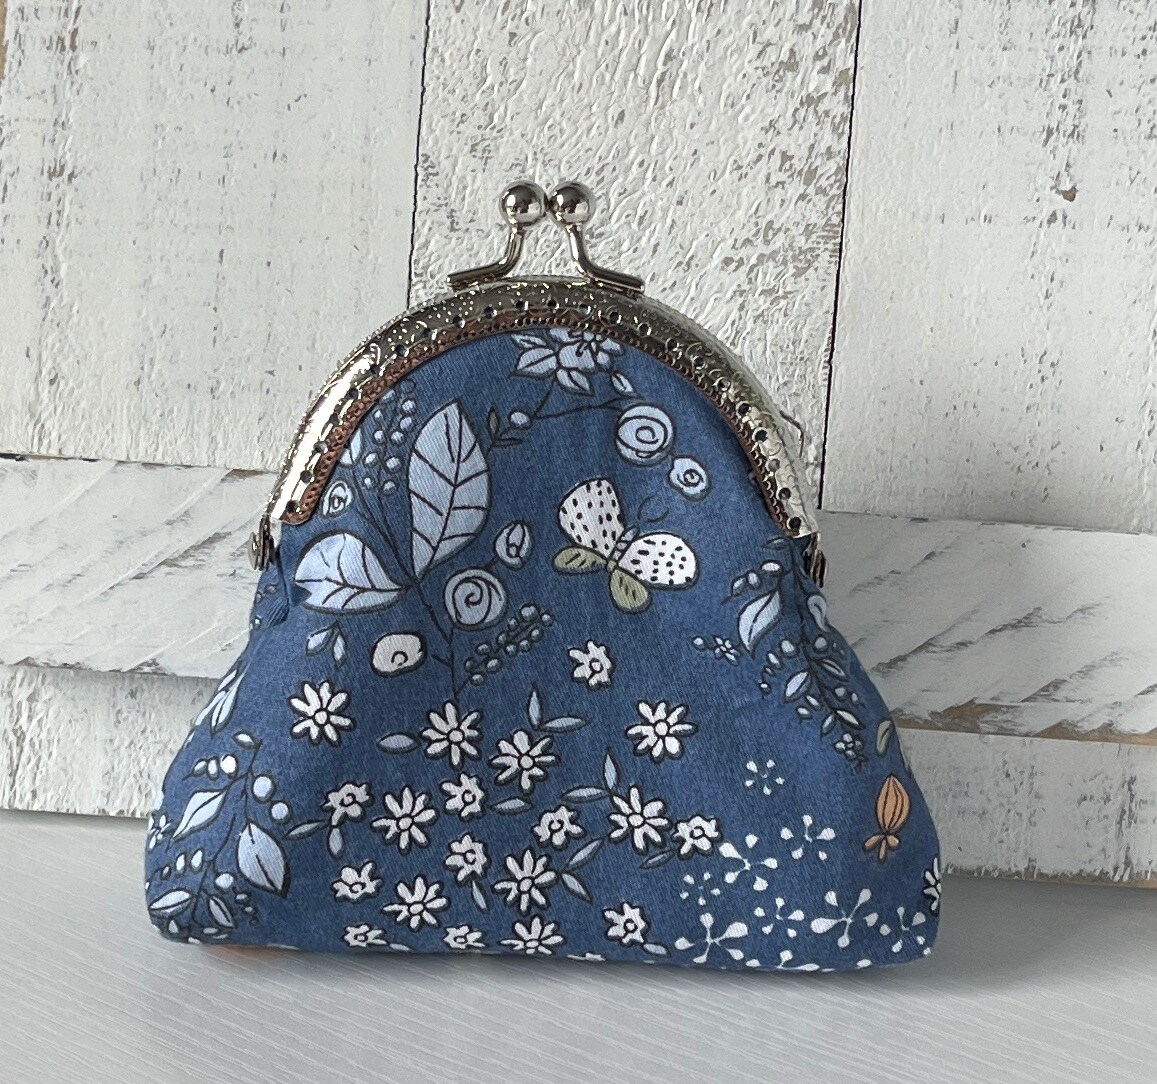 How To Make An Easy Coin Purse - The Seasoned Homemaker®